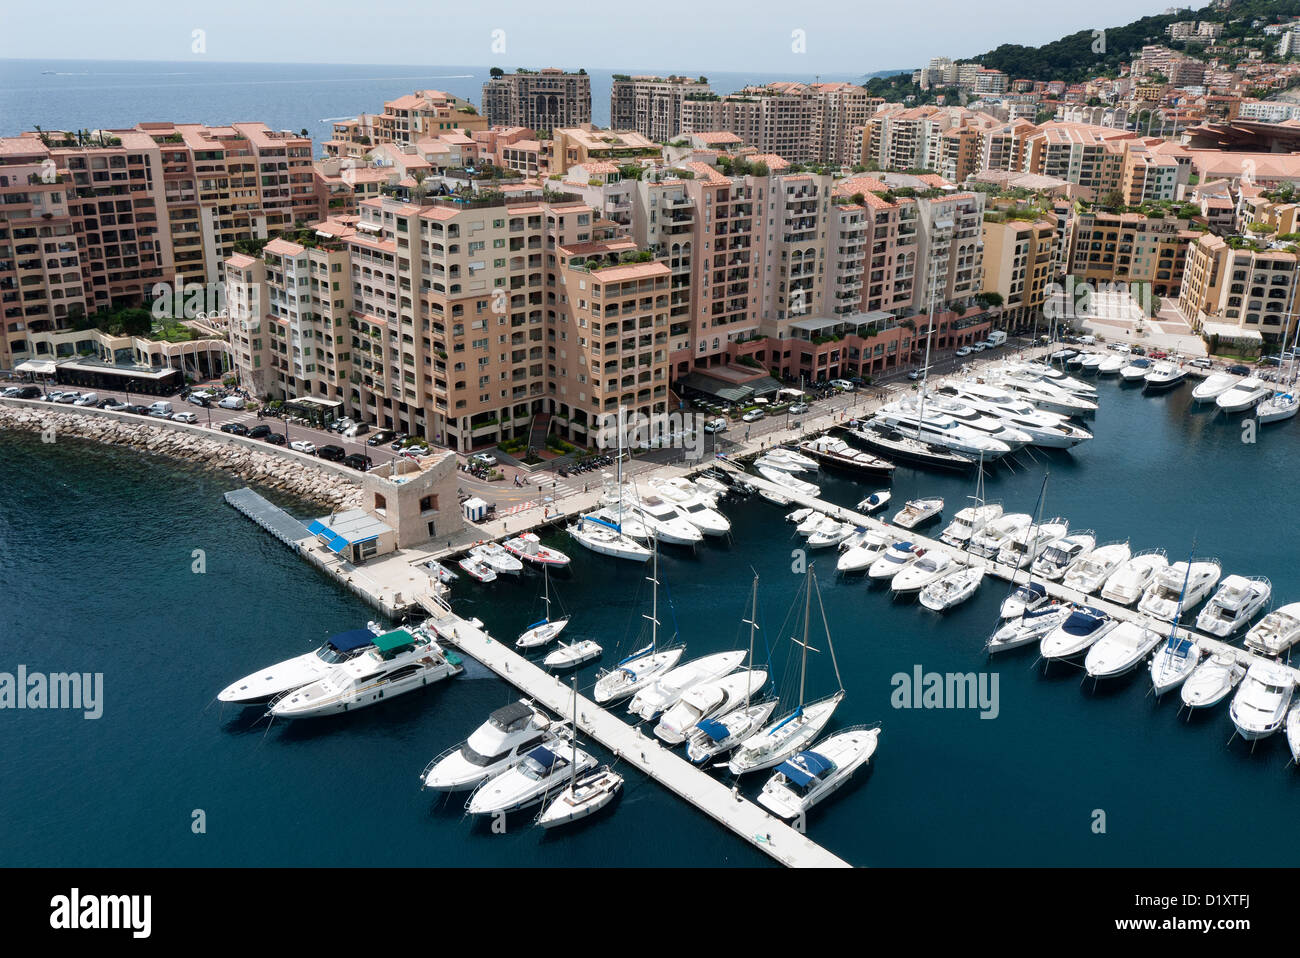 Fontvieille Harbour in the principality of Monaco on the Côte d'Azur Stock Photo